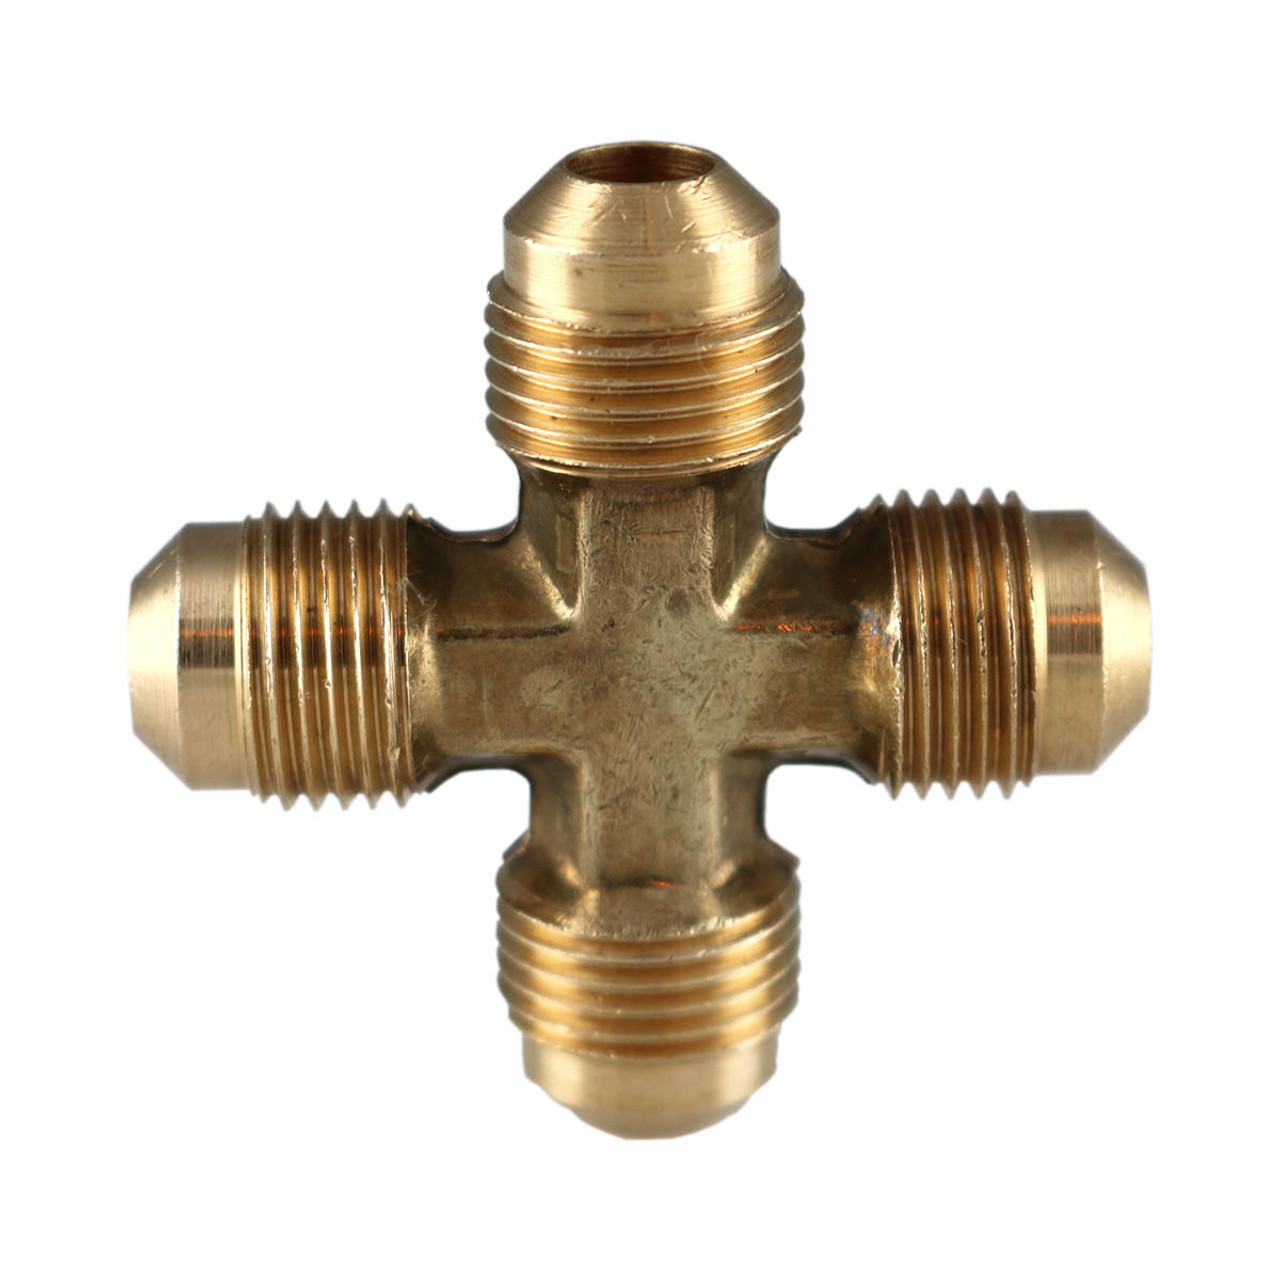 Brass Fittings - Pipe Fittings & More